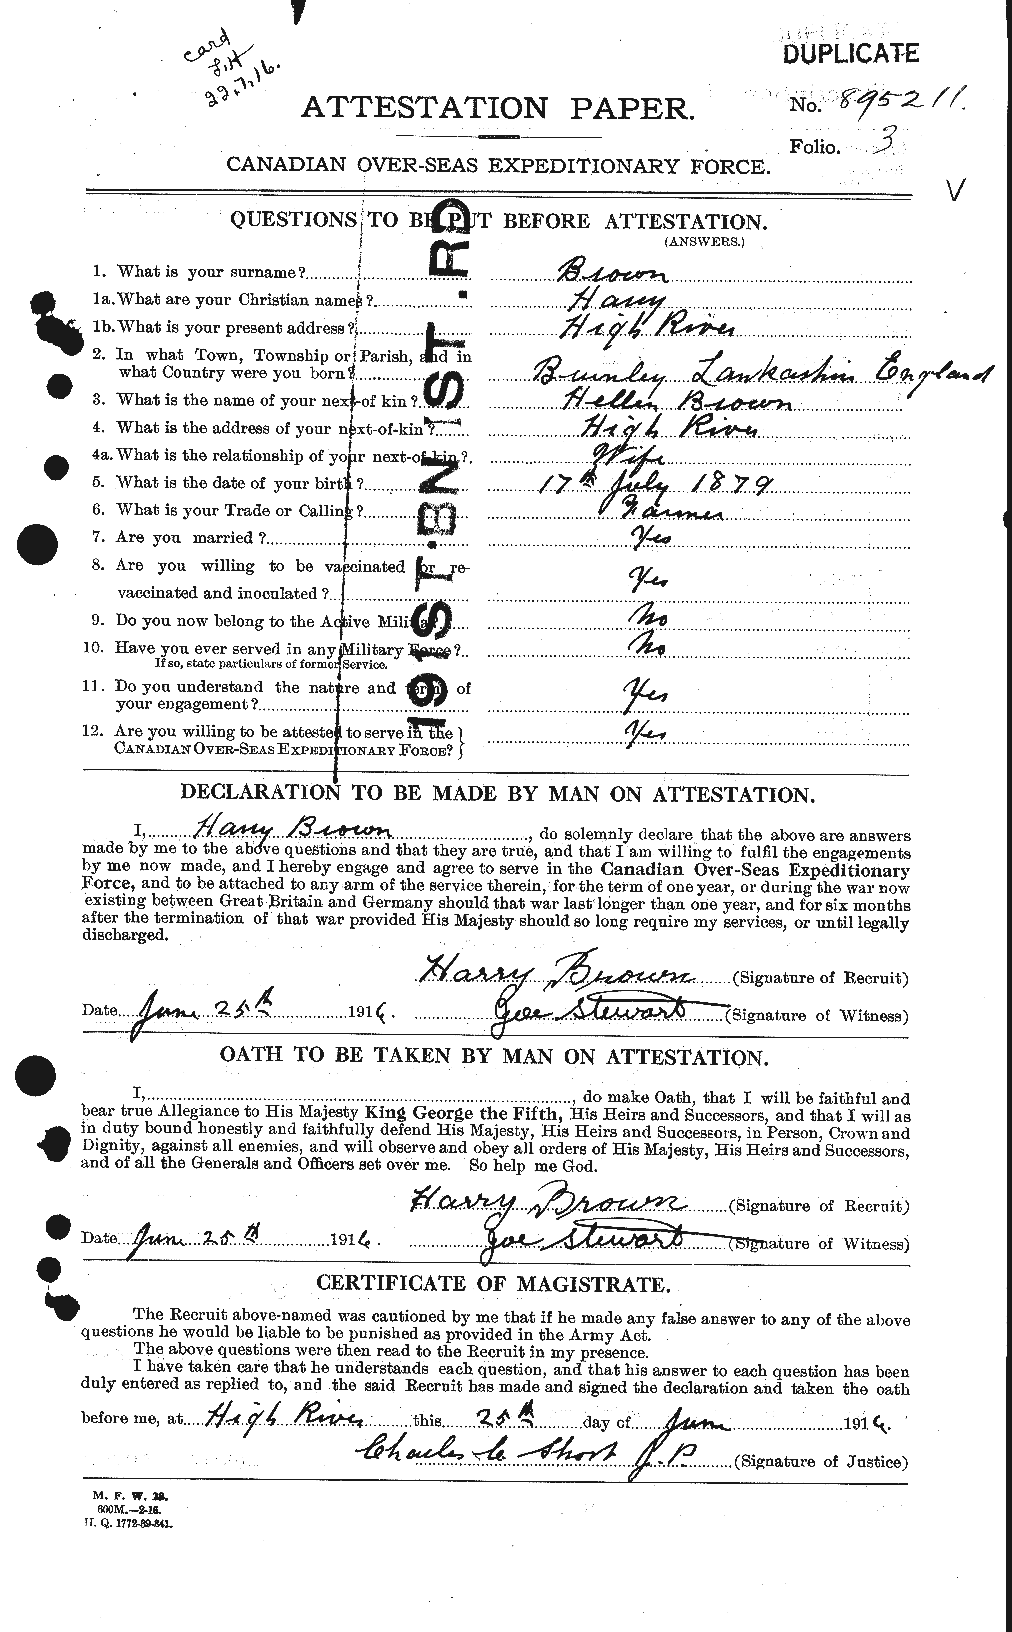 Personnel Records of the First World War - CEF 265431a